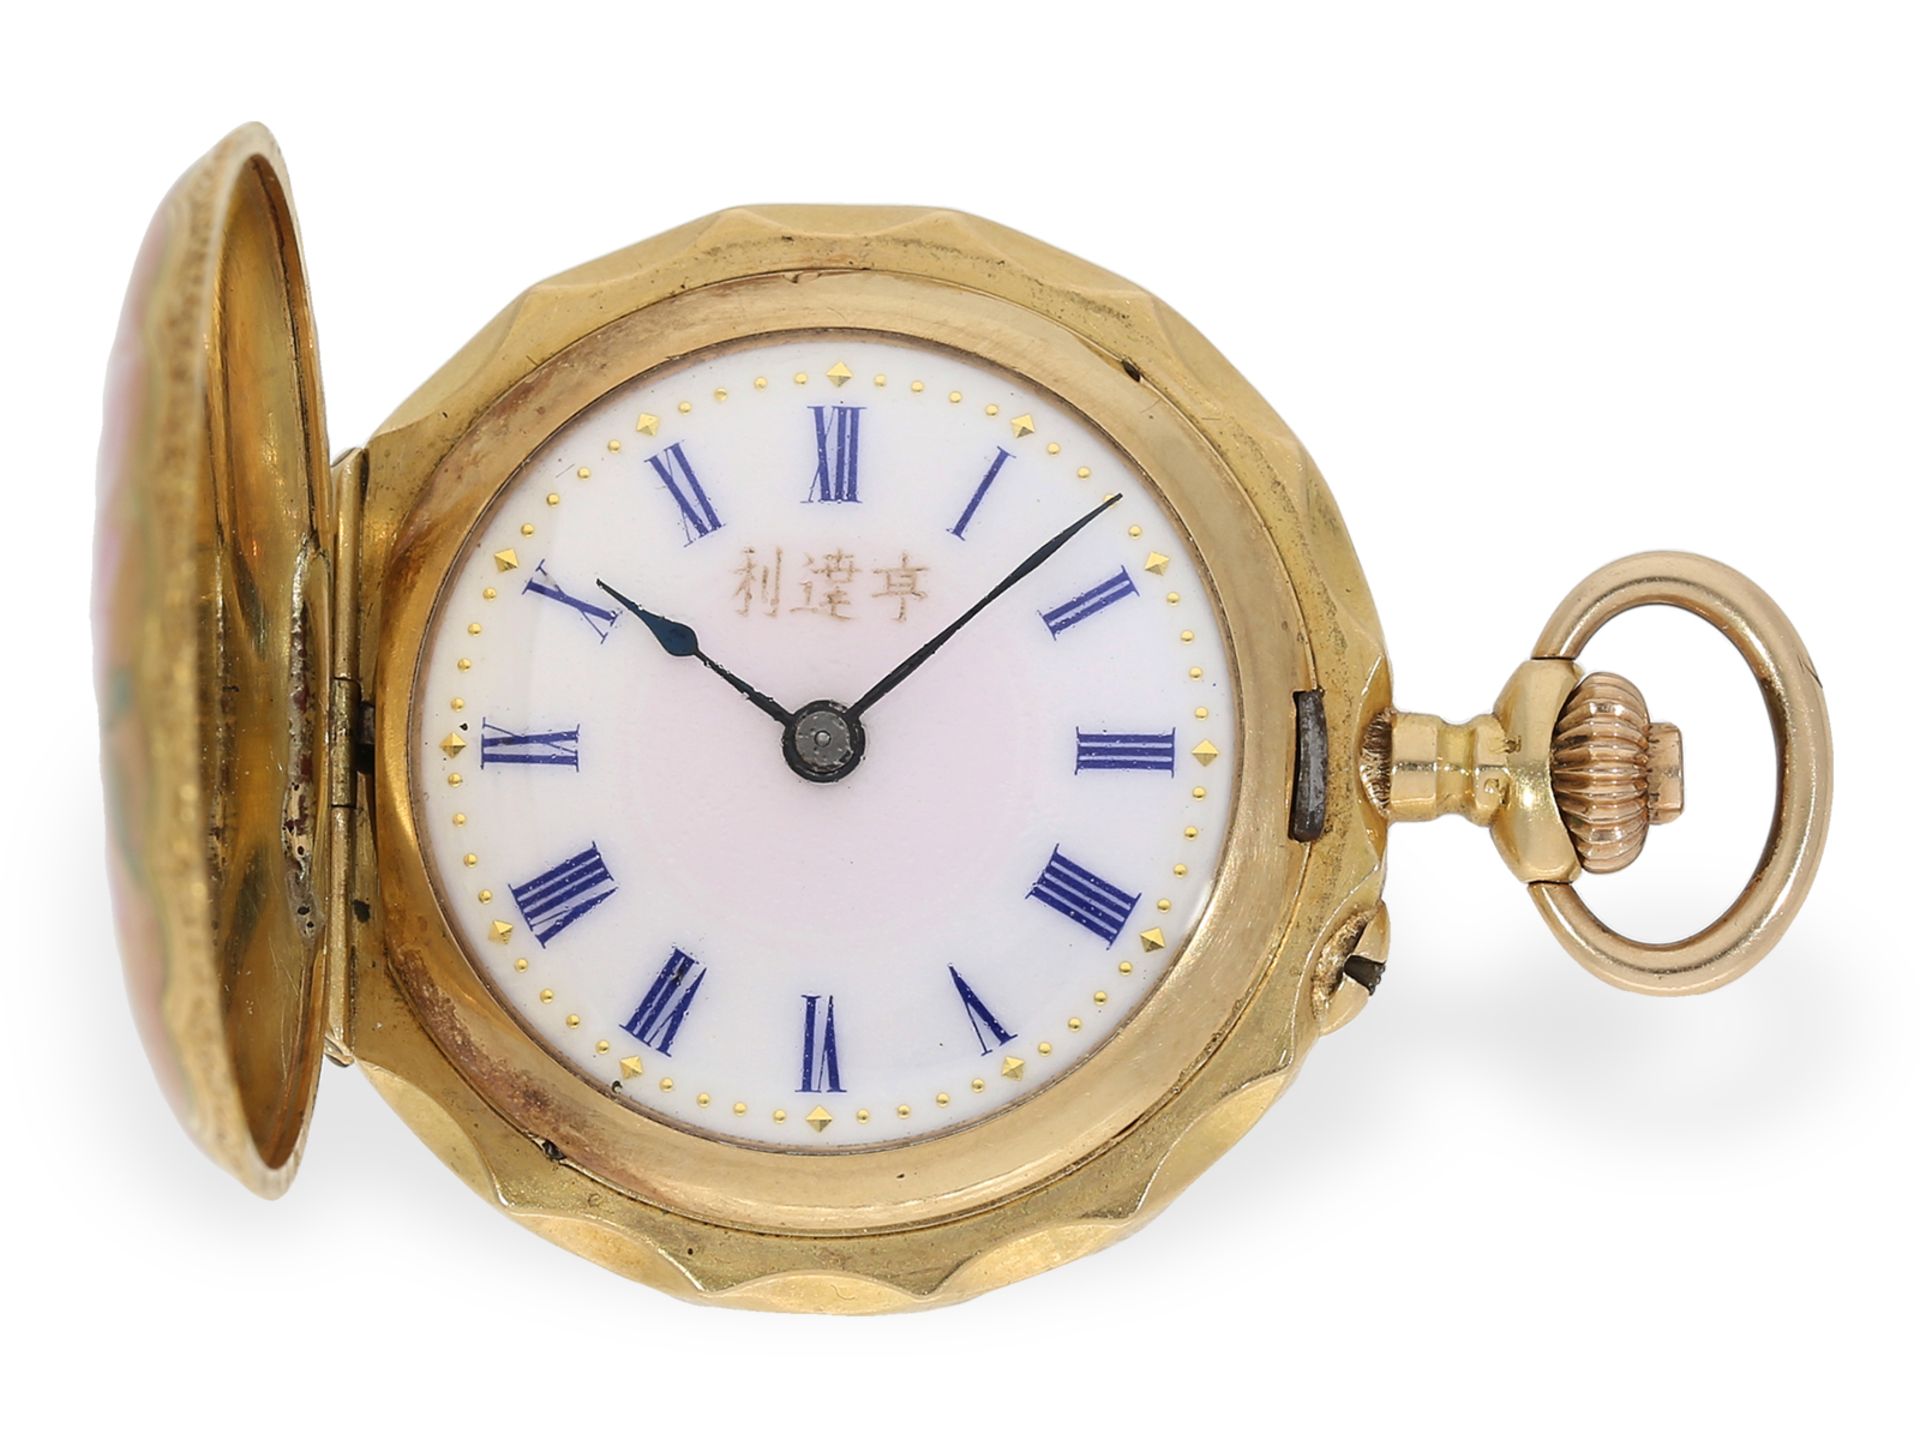 Pocket watch: extremely fine gold/enamel ladies' watch for the Chinese market, ca. 1900 - Image 3 of 6